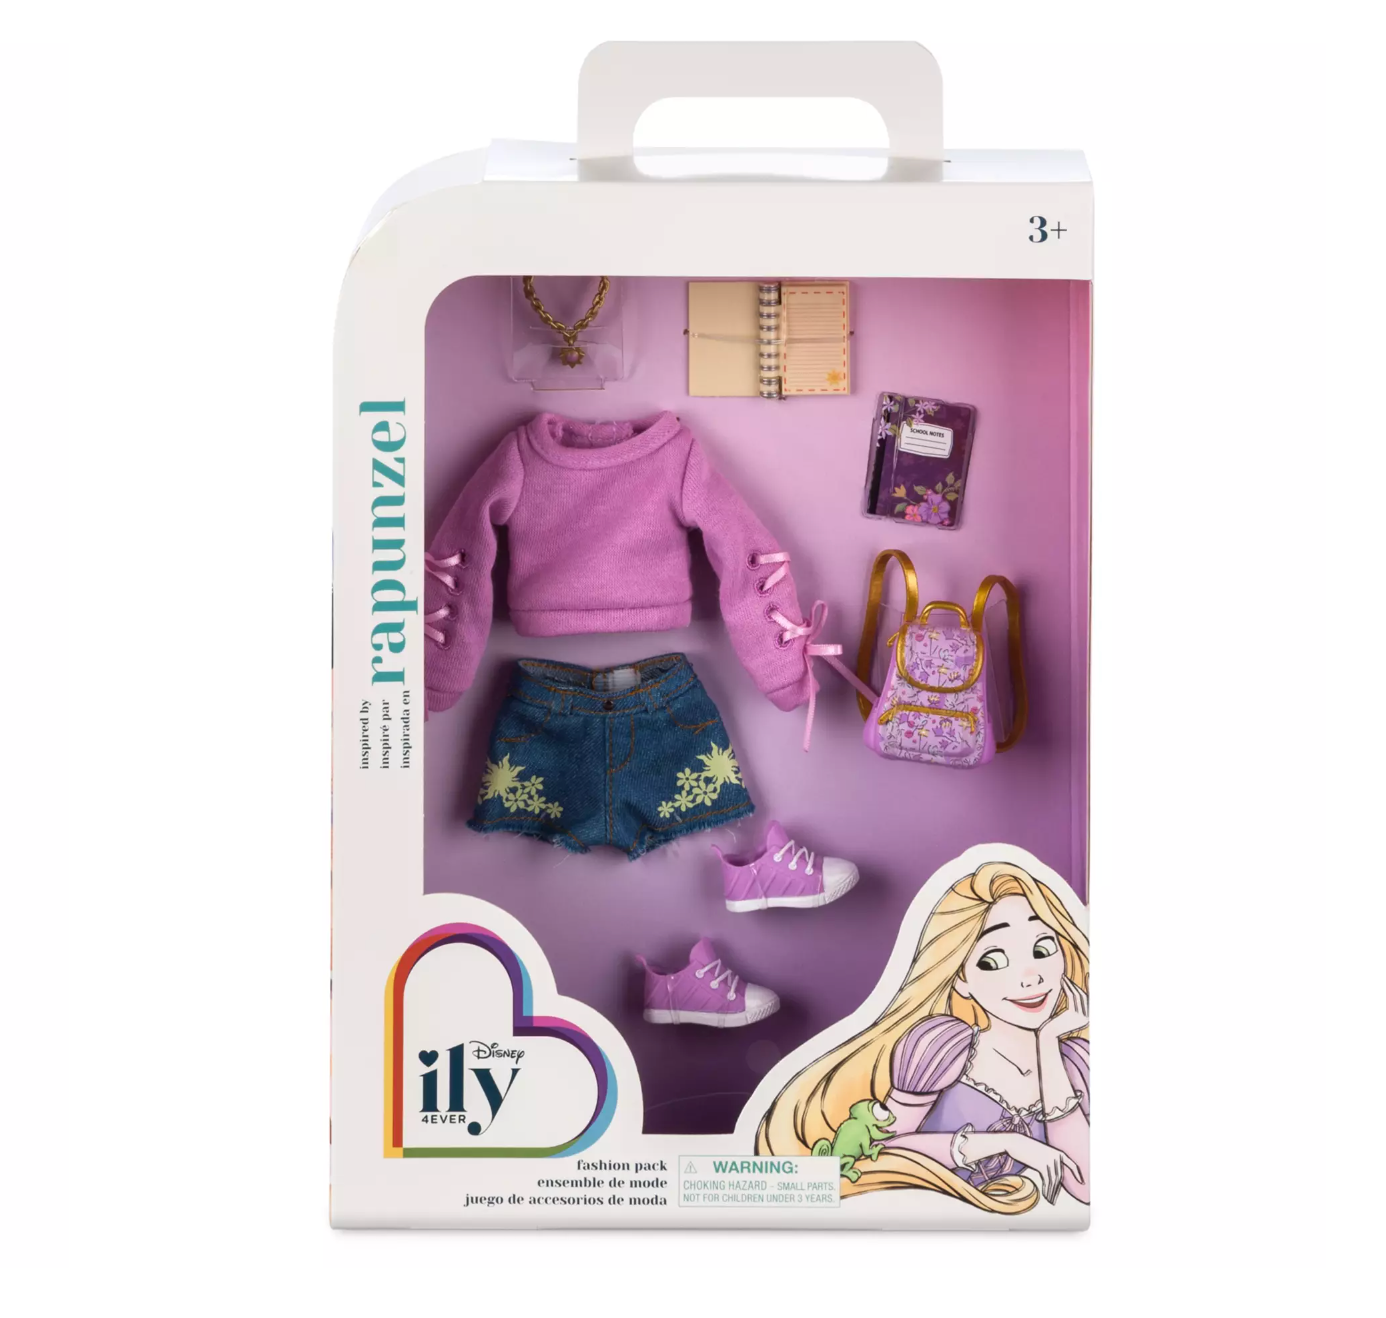 Disney ily 4EVER Fashion Pack Inspired by Rapunzel New with Box